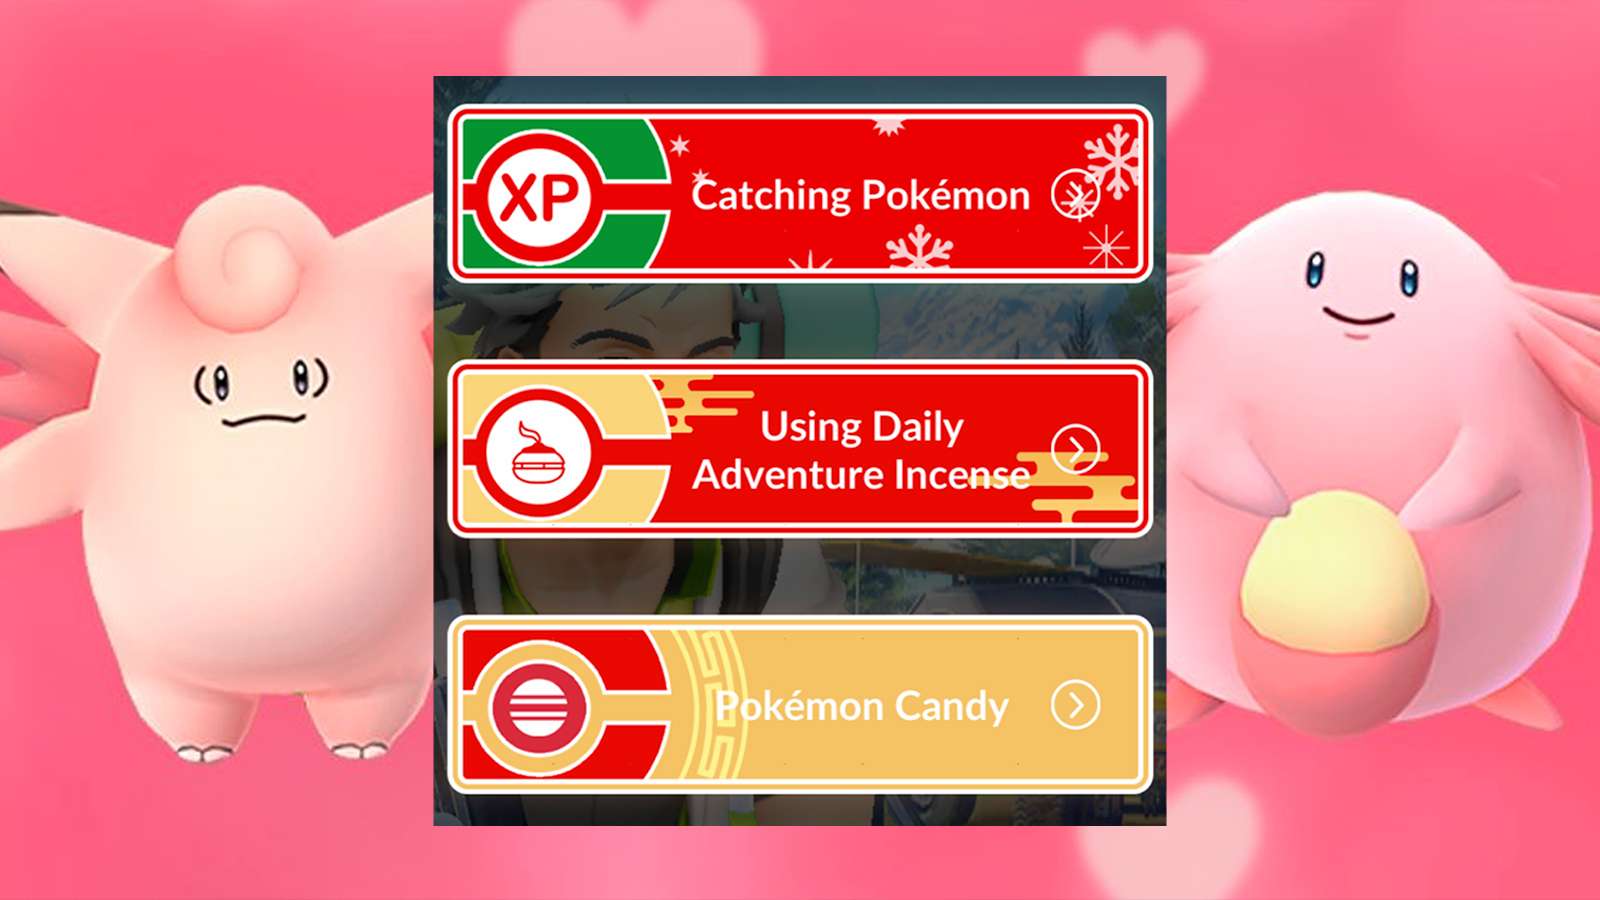 Pokemon Go choose a path: Should you pick Catching, Candy, or